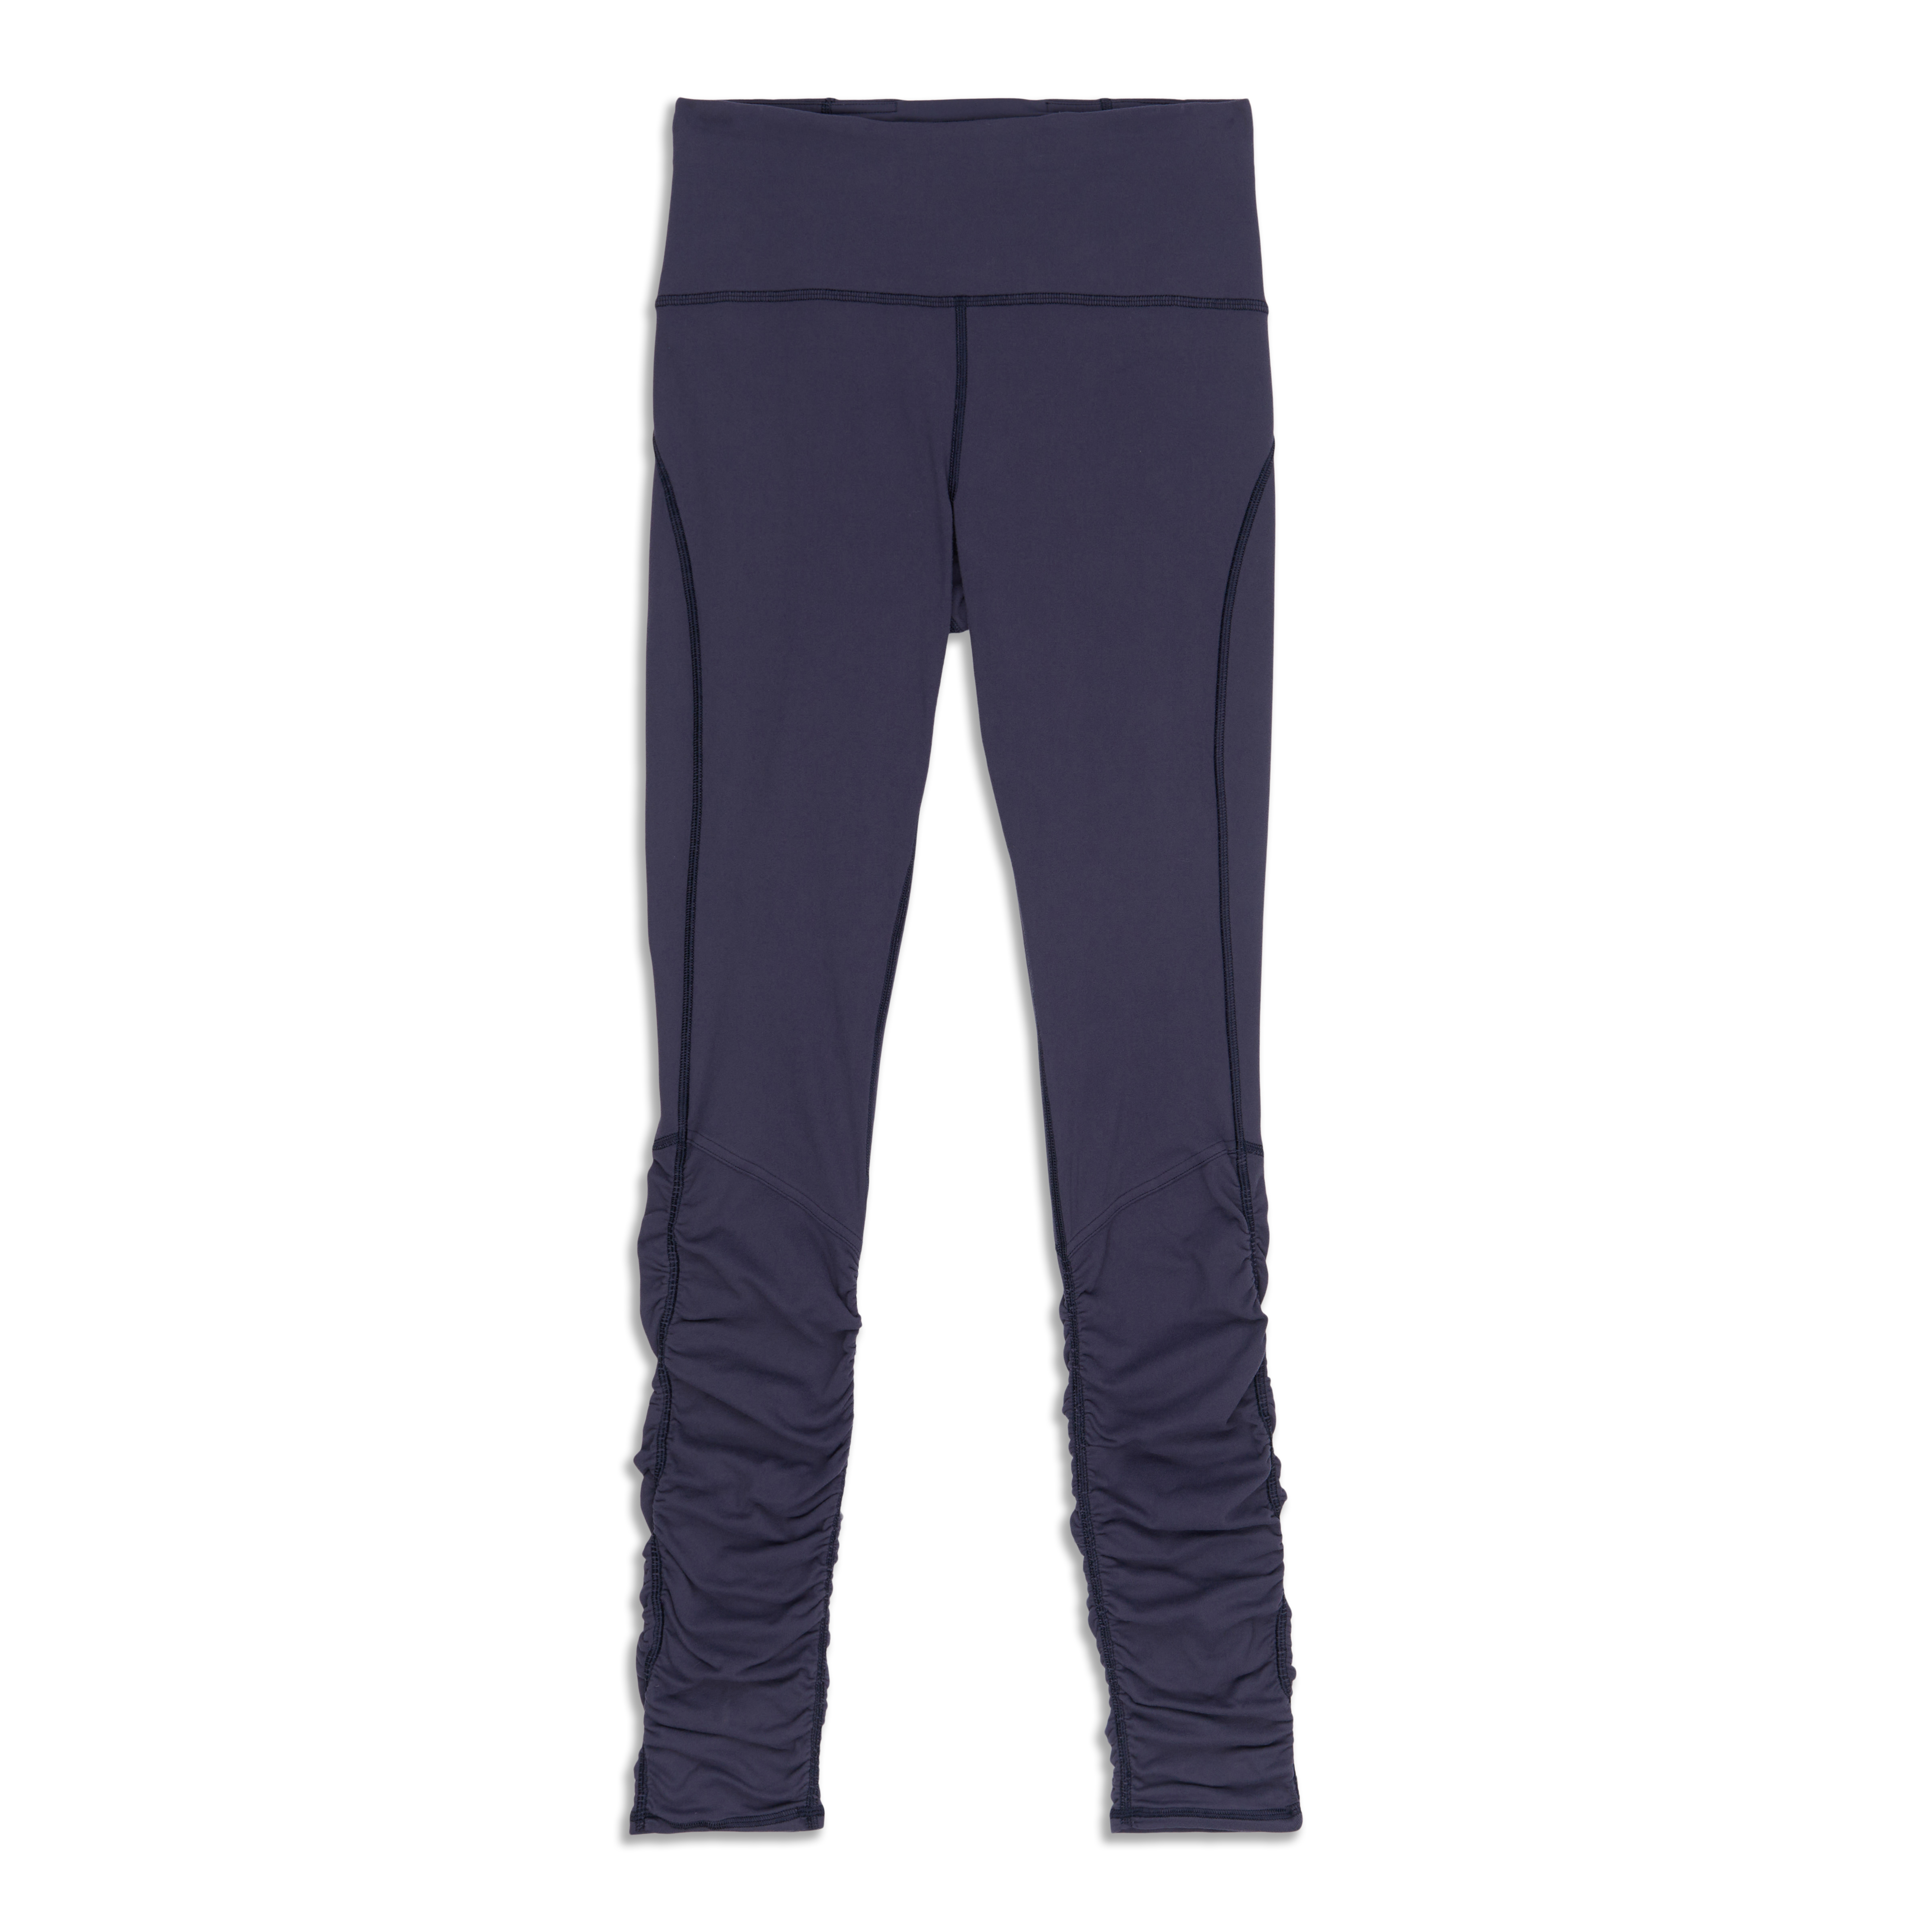 Lululemon Ready To Rulu leggings, Ruched on the legs